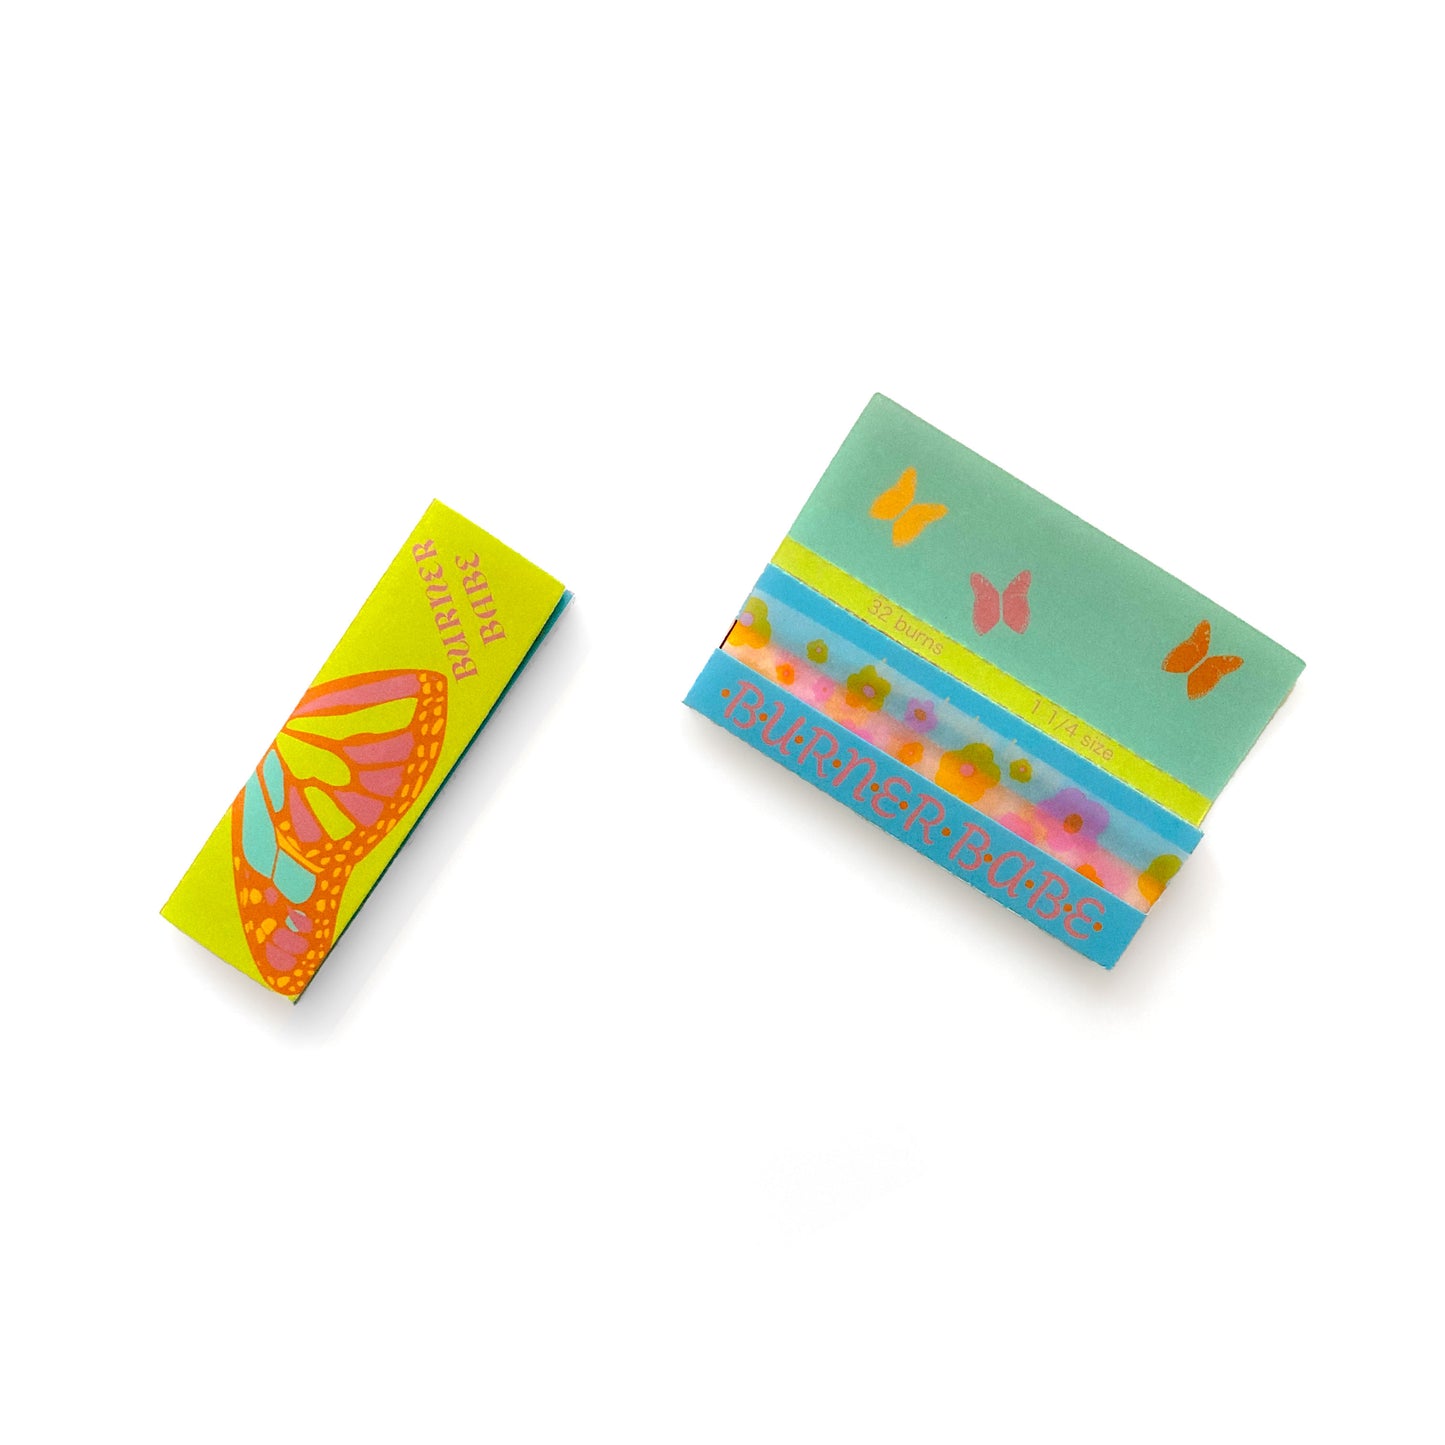 The Lucky Papers, set of 10: purple and orange floral papers. These designer rolling papers are girly, pretty, vegan, cute, cool, standard size, high quality, even burn, natural dyes, best tasting, slow burn.